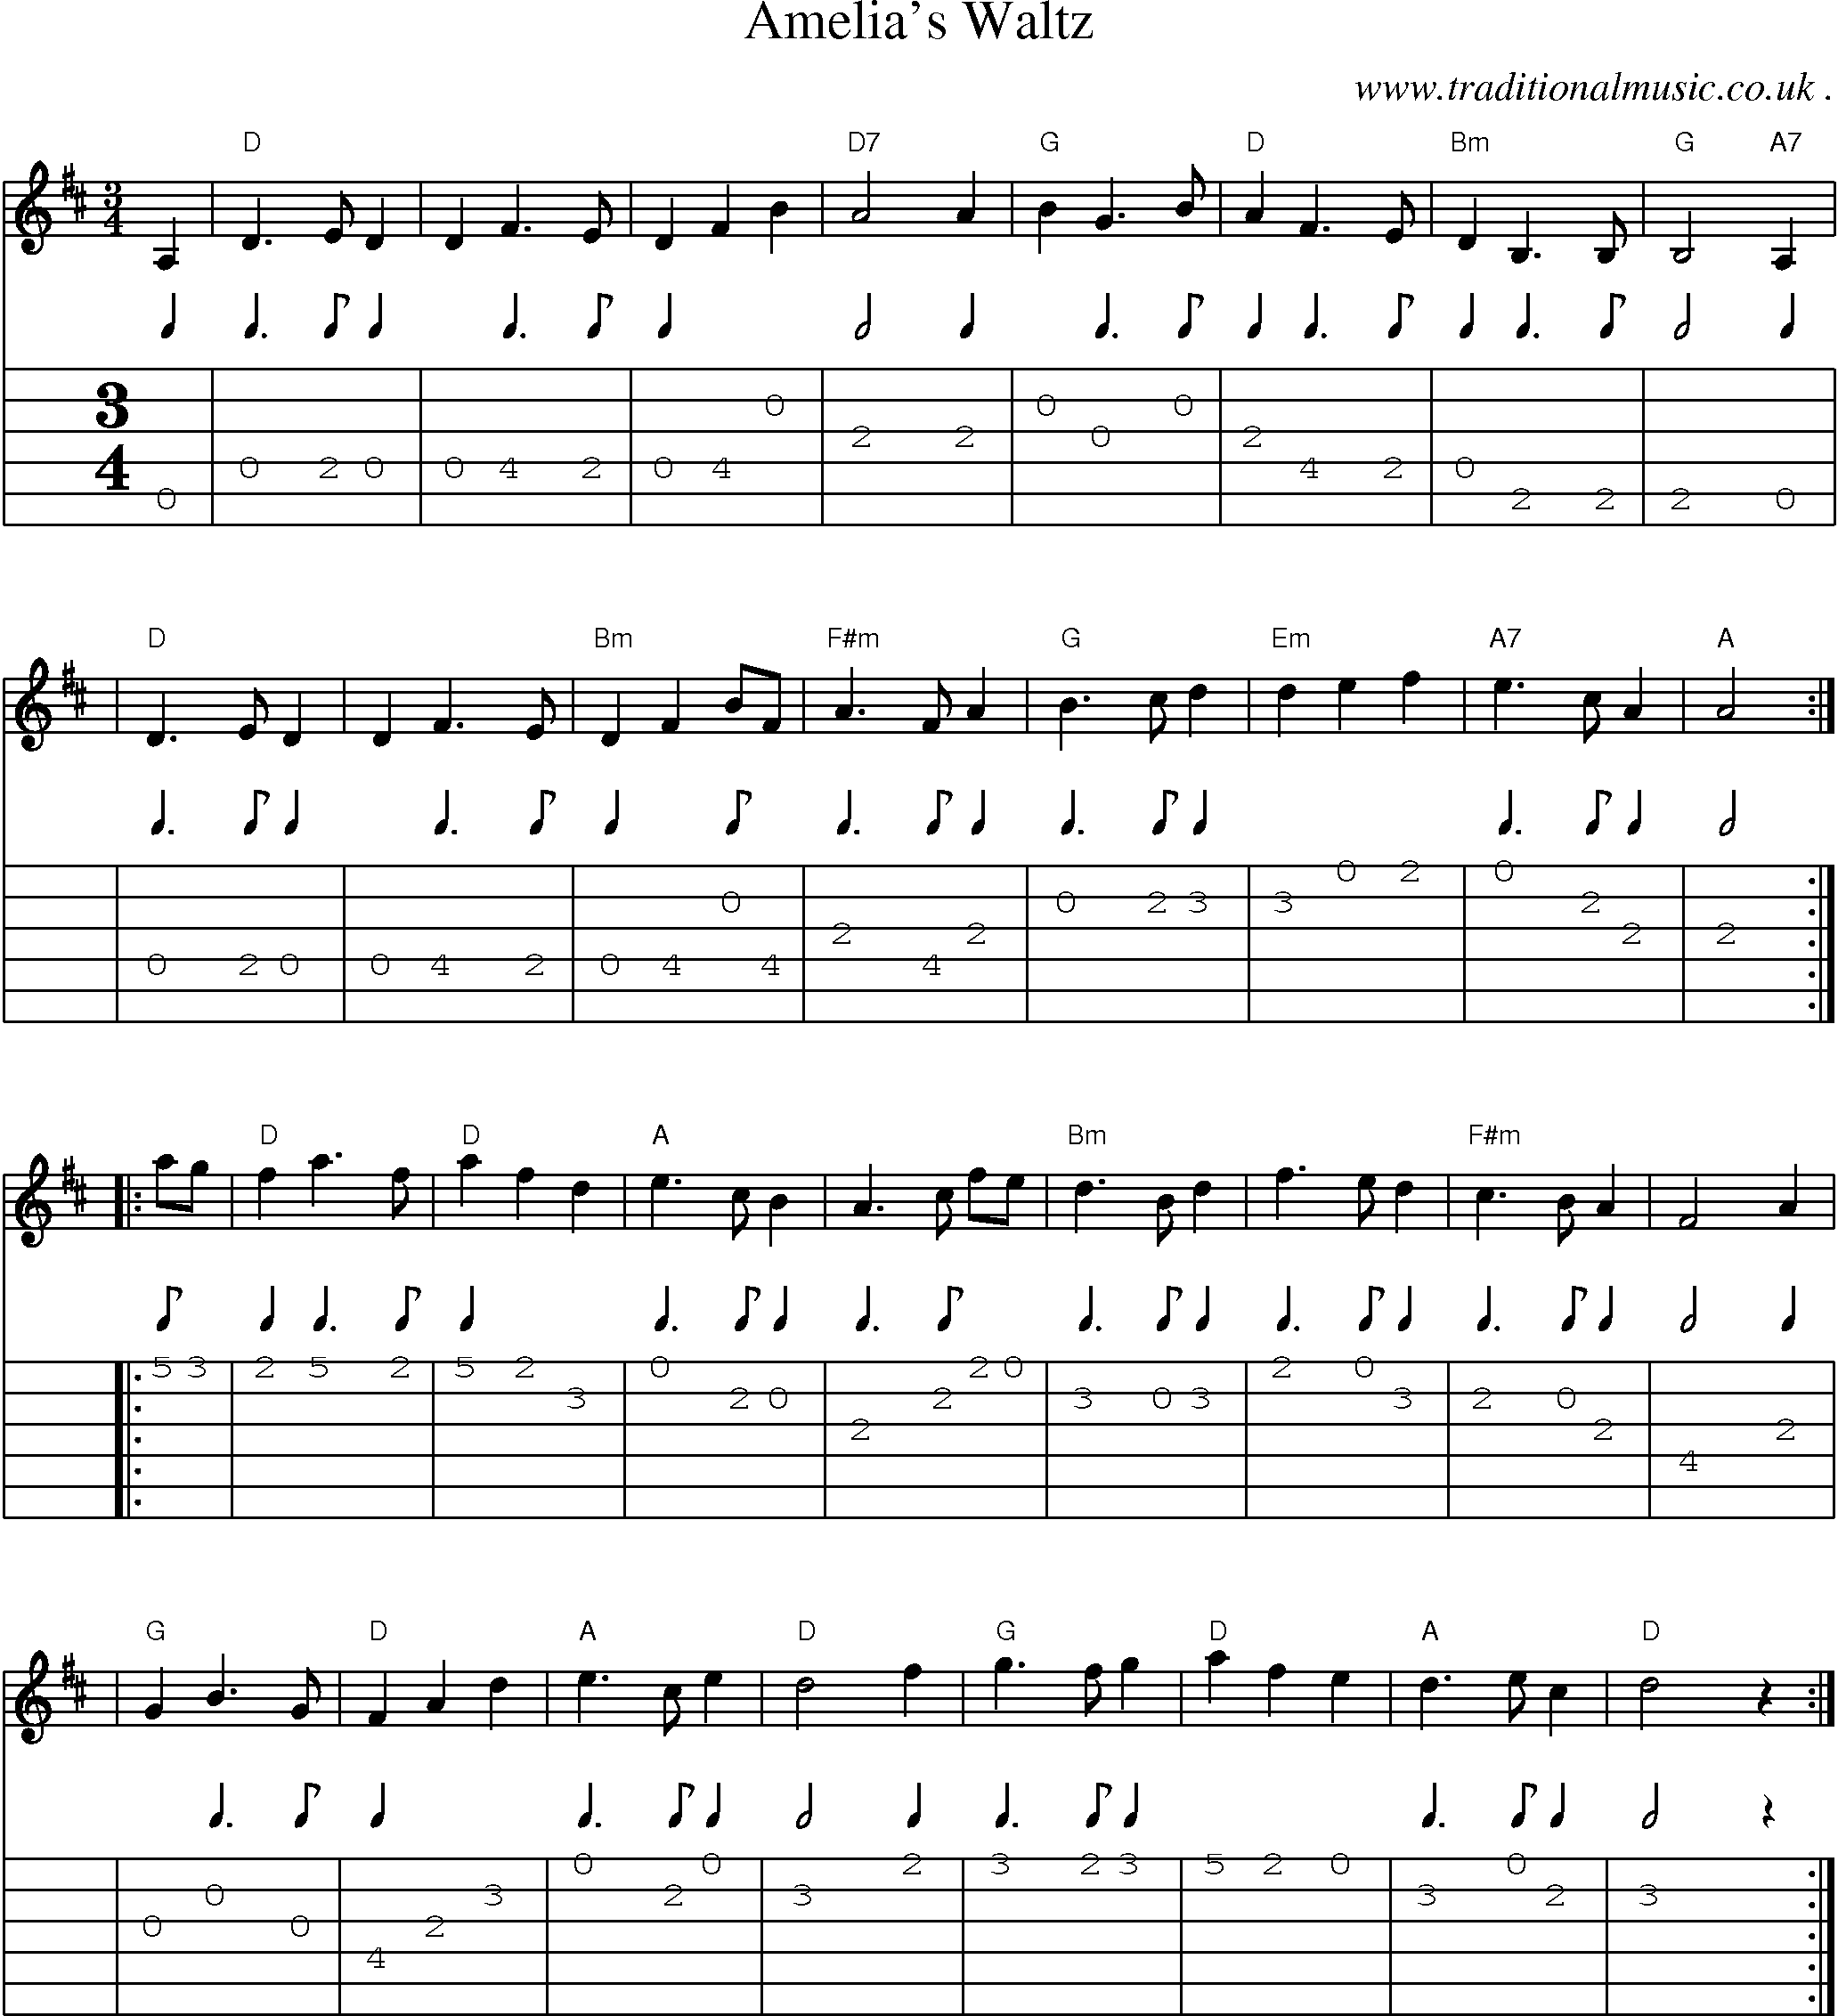 Sheet-music  score, Chords and Guitar Tabs for Amelias Waltz